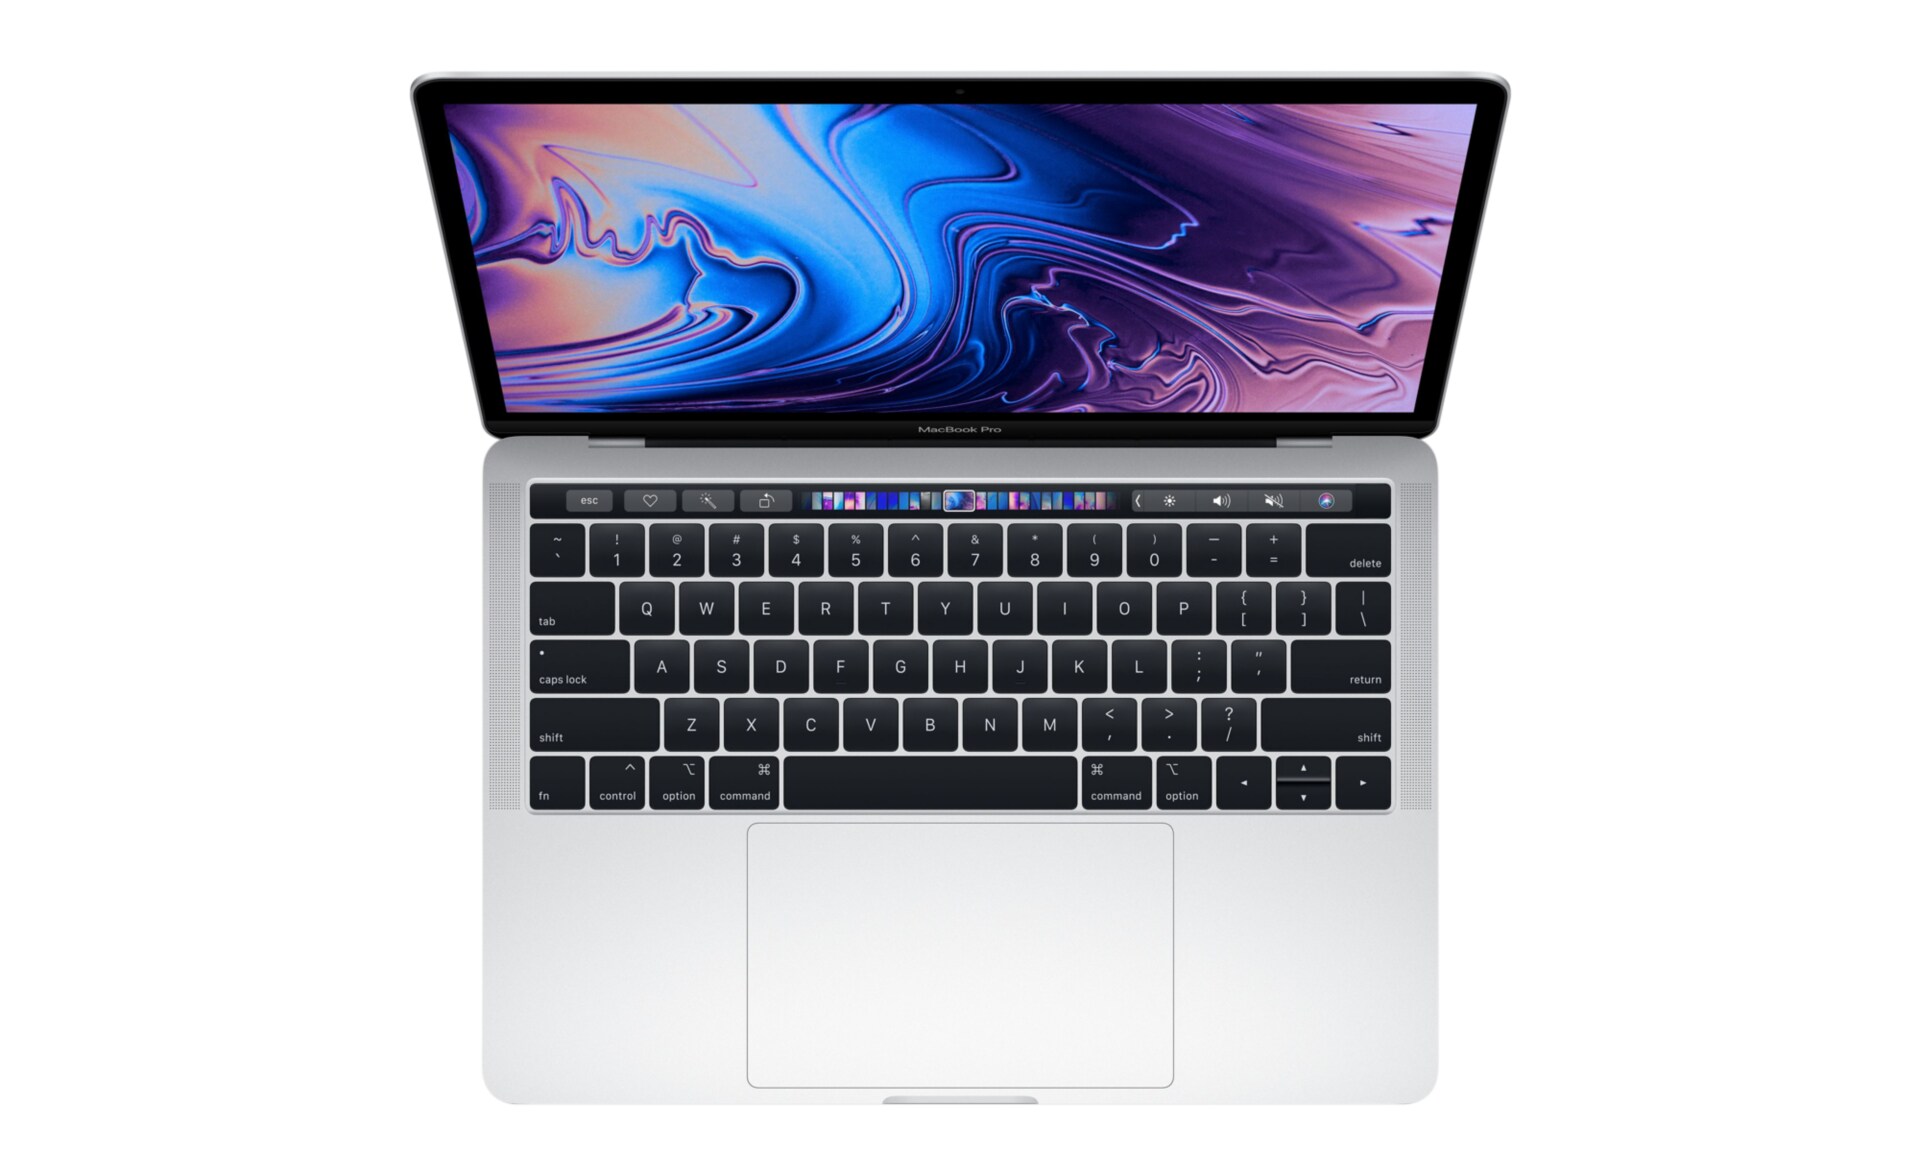 Apple MacBook Pro 13" Core i5 1.4GHz 8GB 1TB - Touch Bar - Silver